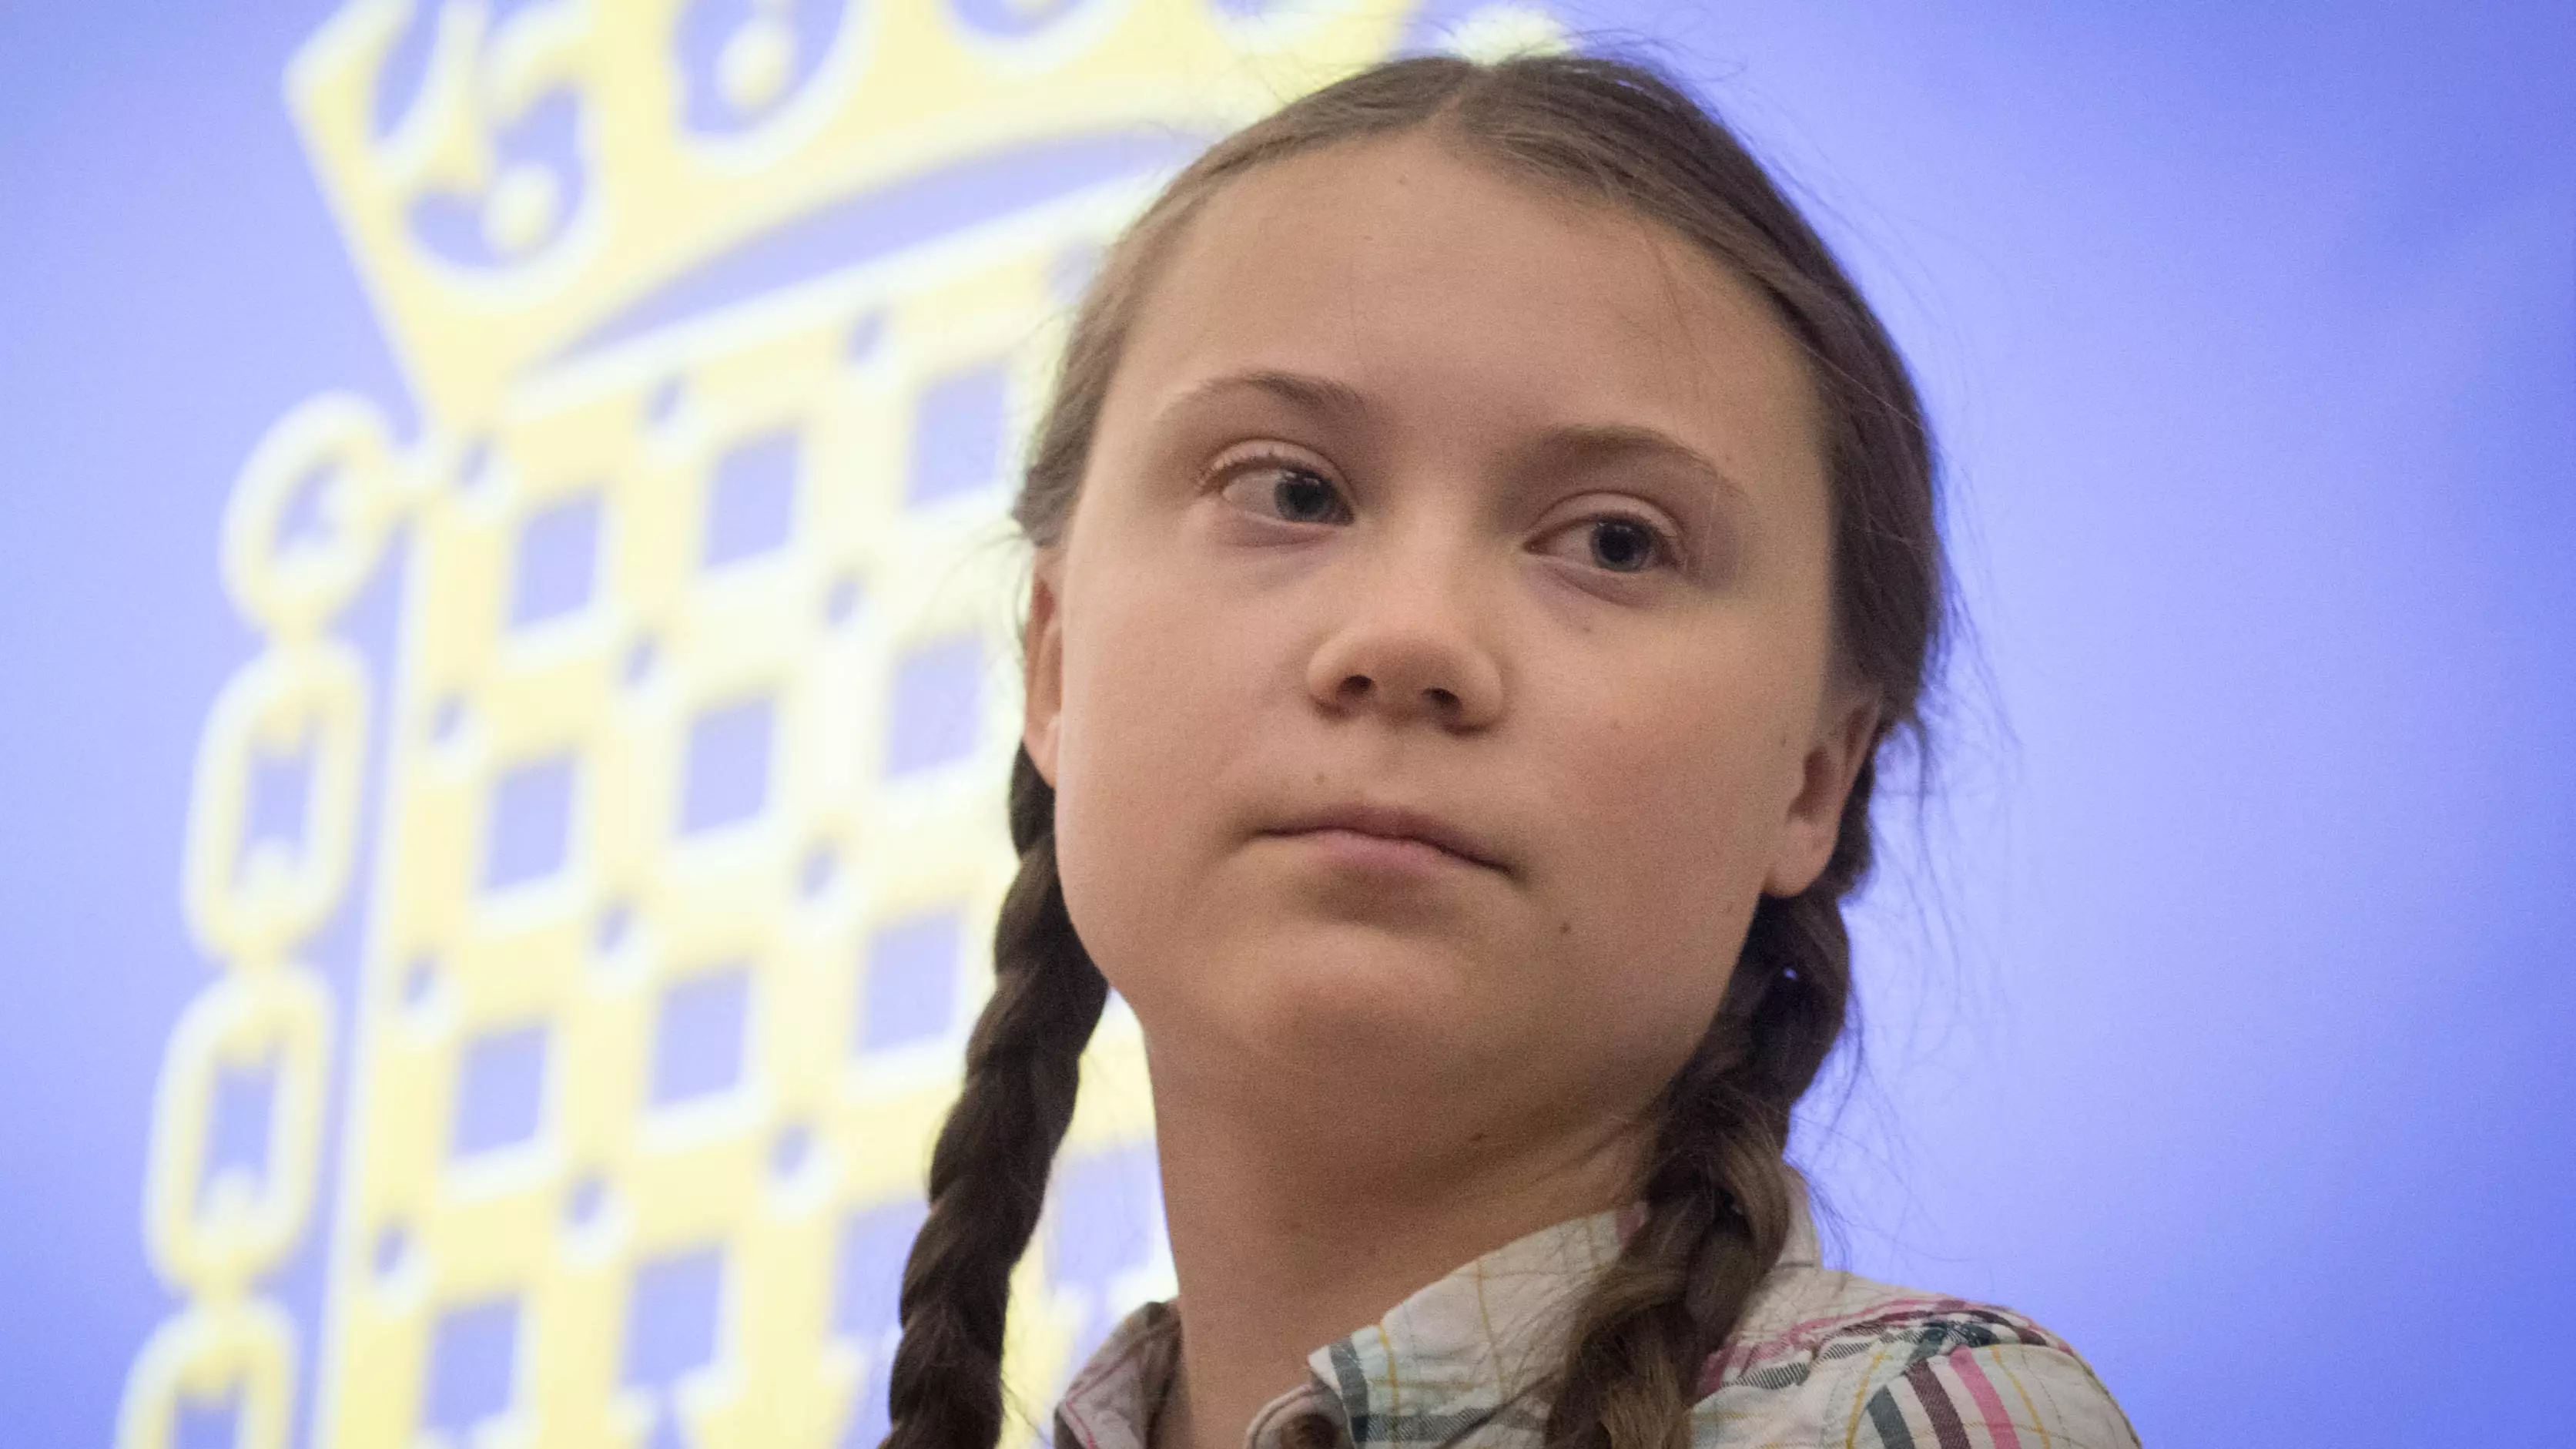 Greta Thunberg Awarded Author Of The Year By Waterstones For Collection Of Speeches